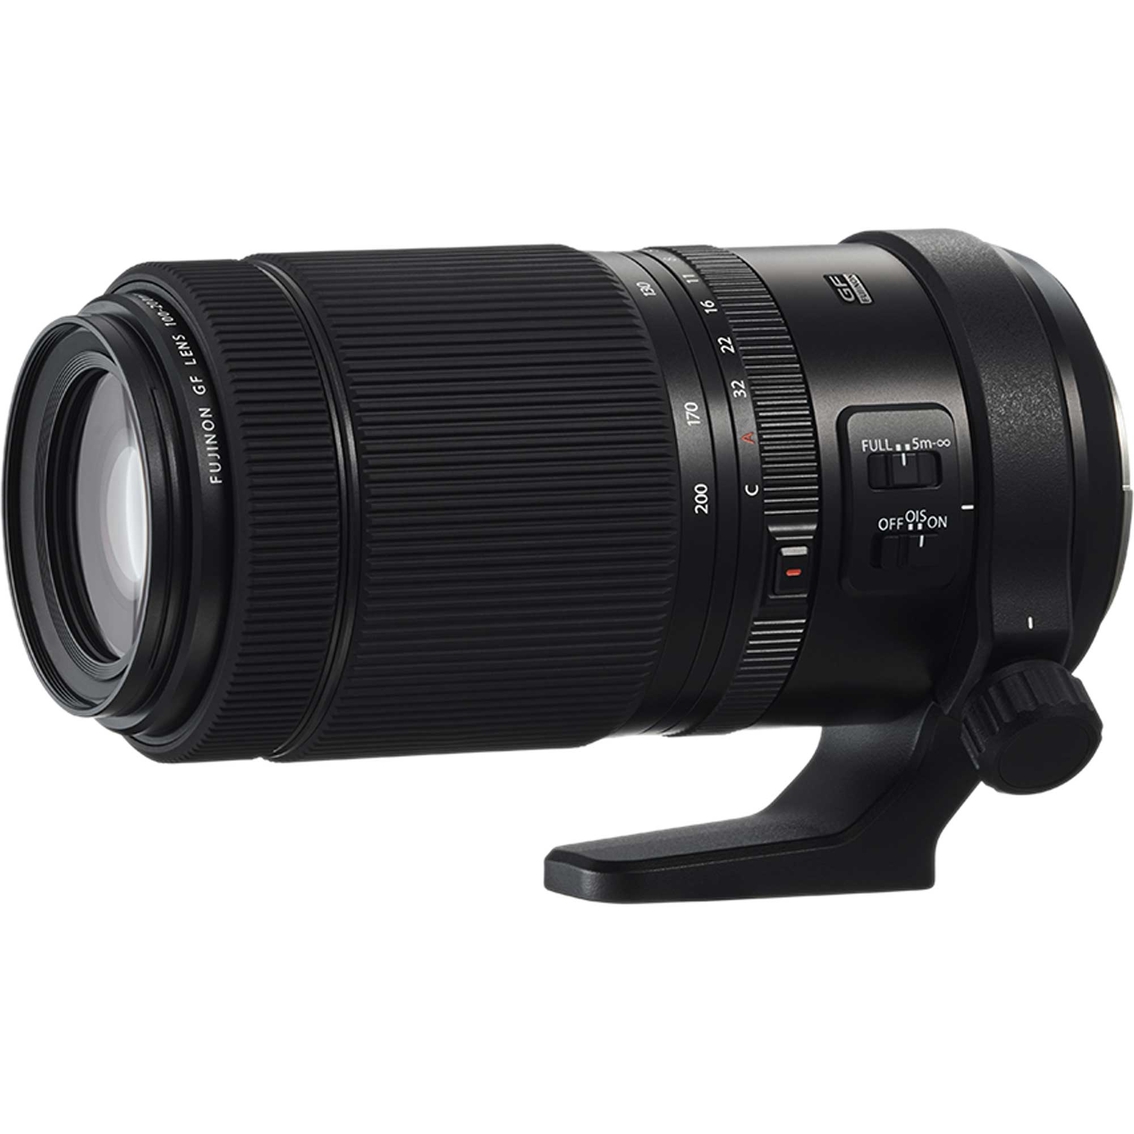 Fujifilm Fujinon GF 100 to 200mm F5.6 R LM OIS Weather Resistant Lens - Image 2 of 5